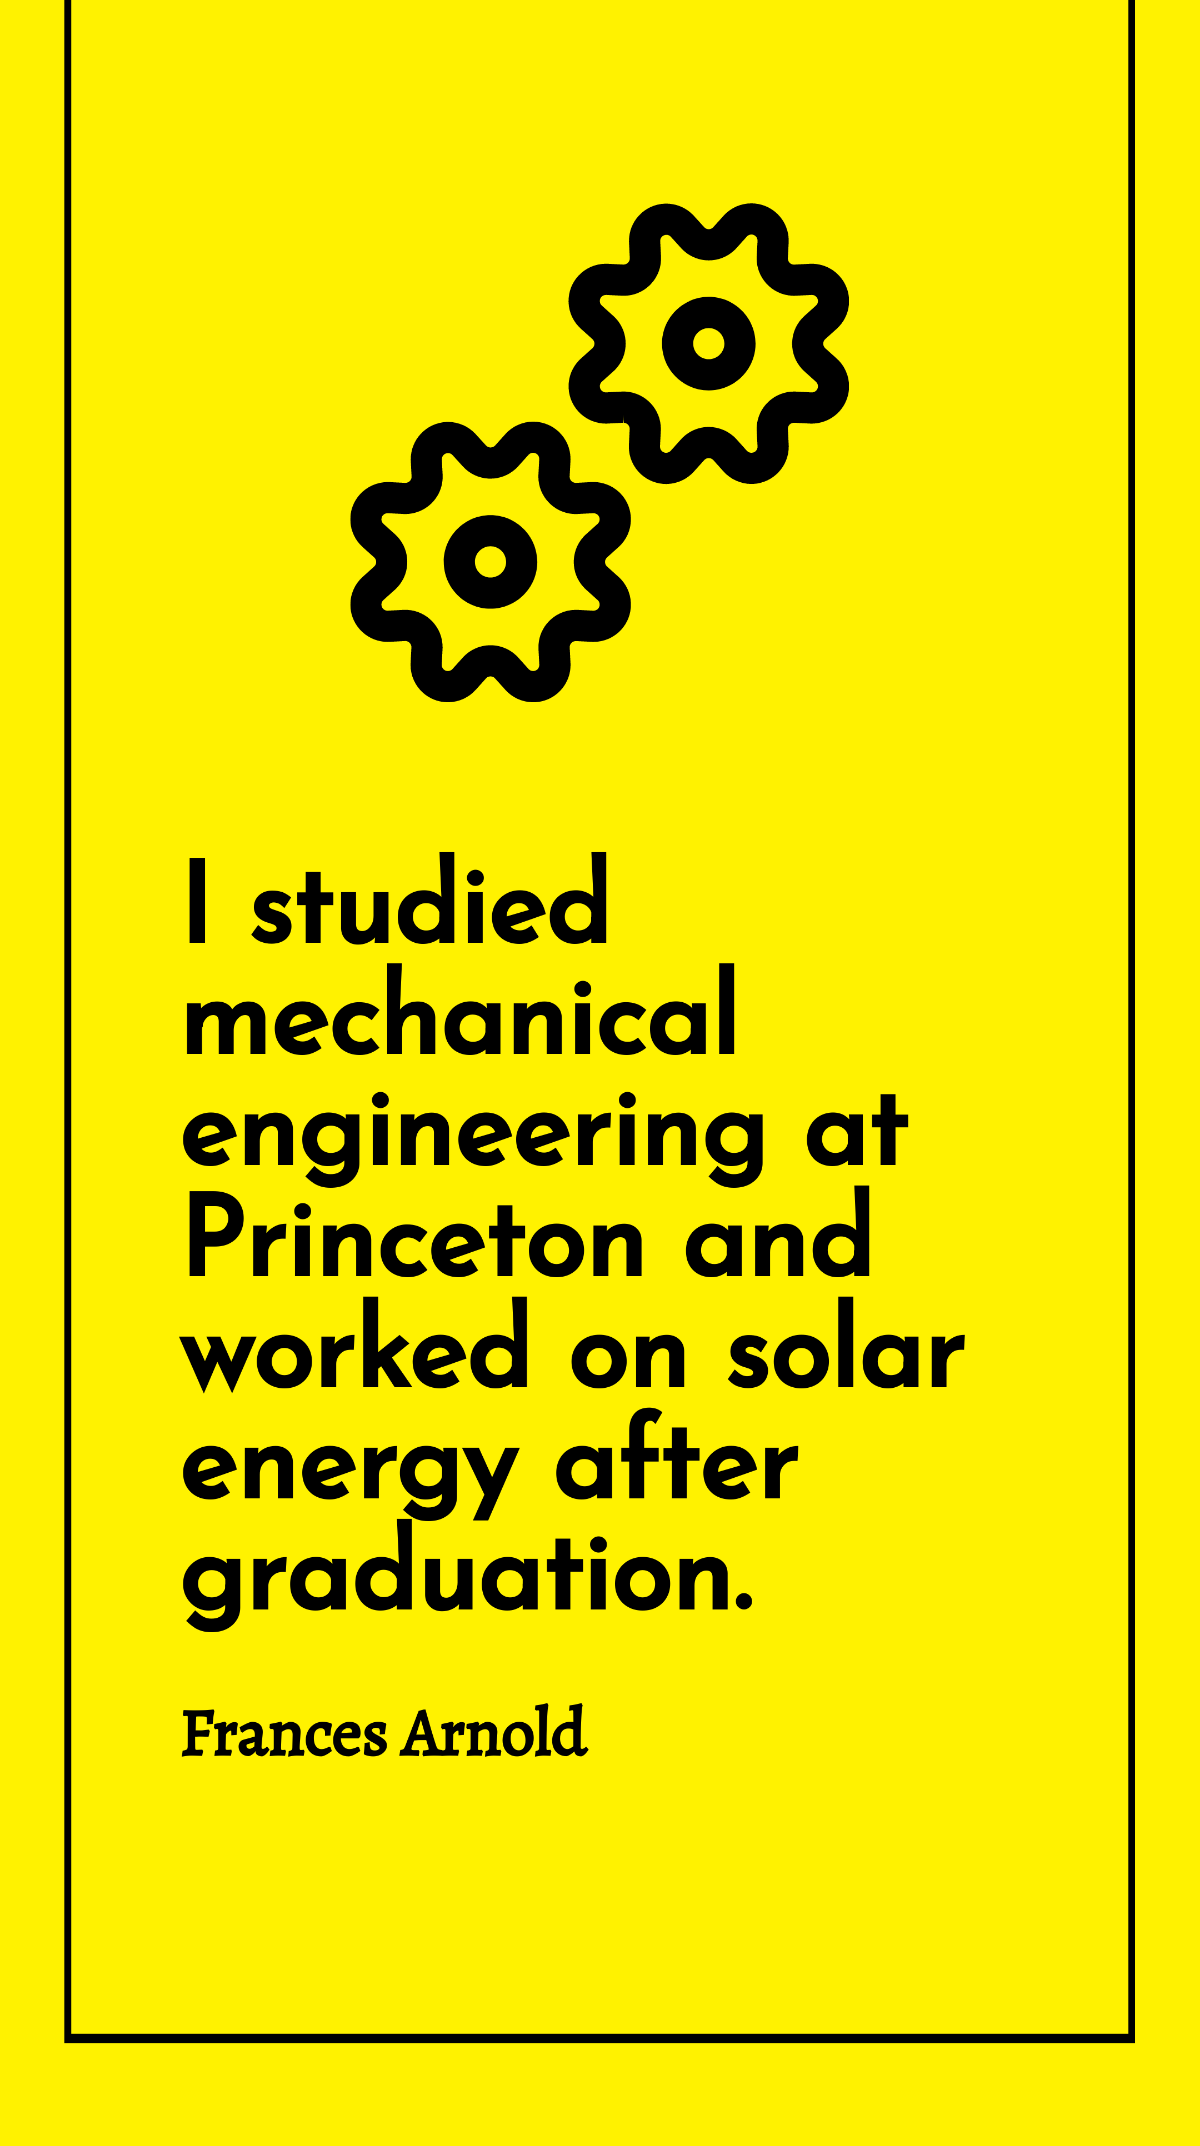 Frances Arnold - I studied mechanical engineering at Princeton and worked on solar energy after graduation.